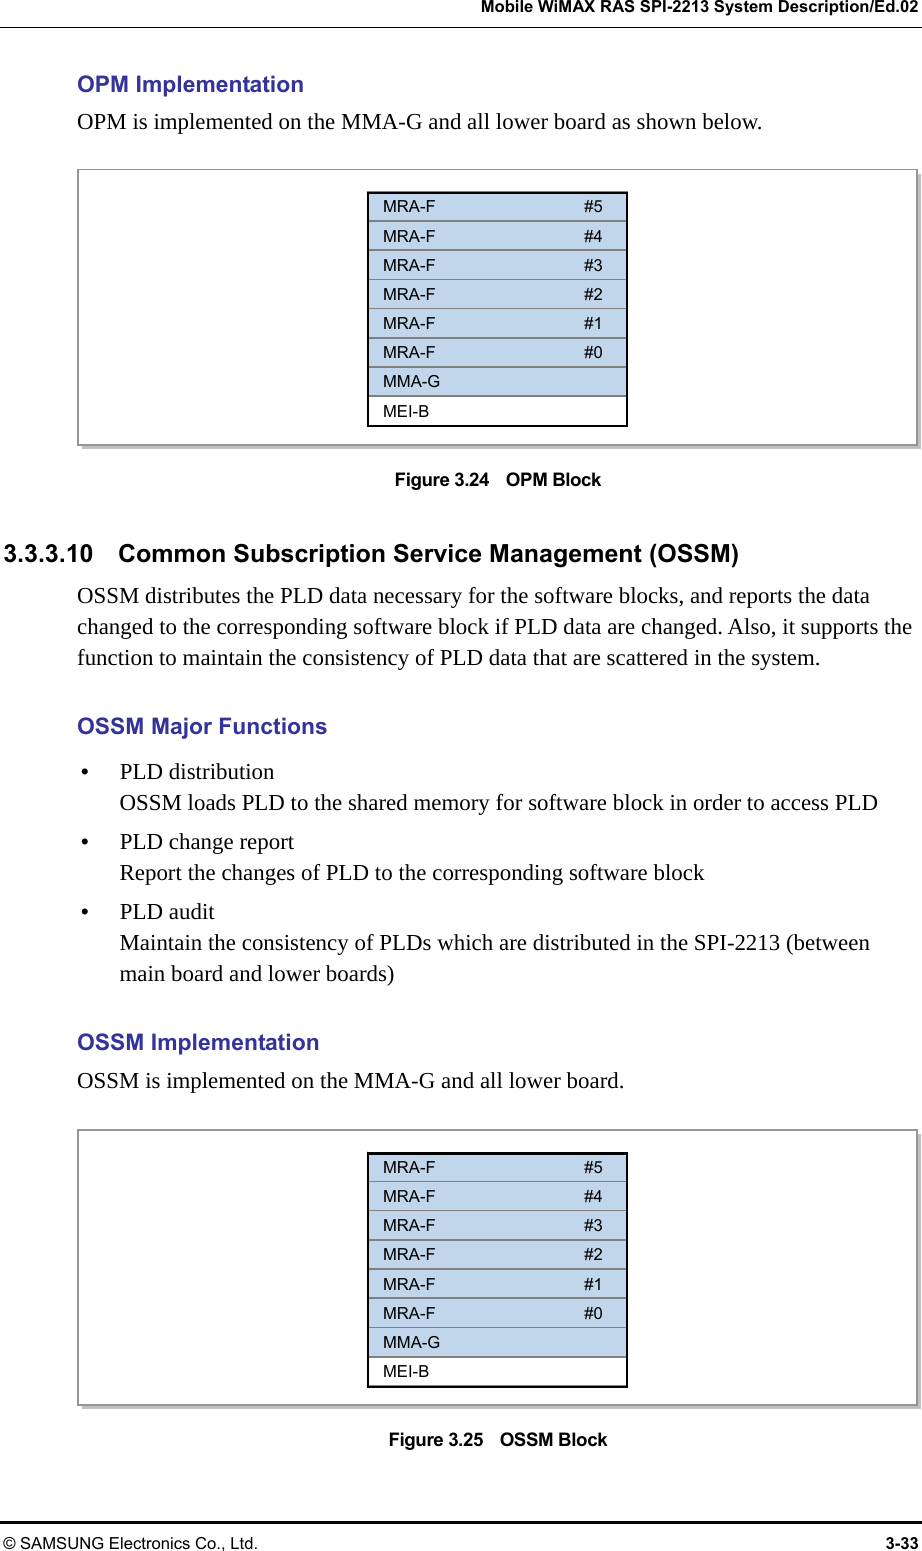   Mobile WiMAX RAS SPI-2213 System Description/Ed.02 © SAMSUNG Electronics Co., Ltd.  3-33 OPM Implementation OPM is implemented on the MMA-G and all lower board as shown below.  Figure 3.24    OPM Block  3.3.3.10    Common Subscription Service Management (OSSM) OSSM distributes the PLD data necessary for the software blocks, and reports the data changed to the corresponding software block if PLD data are changed. Also, it supports the function to maintain the consistency of PLD data that are scattered in the system.  OSSM Major Functions y PLD distribution OSSM loads PLD to the shared memory for software block in order to access PLD y PLD change report Report the changes of PLD to the corresponding software block y PLD audit Maintain the consistency of PLDs which are distributed in the SPI-2213 (between main board and lower boards)  OSSM Implementation OSSM is implemented on the MMA-G and all lower board.  Figure 3.25    OSSM Block MRA-F #5 MRA-F #4 MRA-F #3 MRA-F #2 MRA-F #1 MRA-F #0 MMA-G MEI-BMRA-F #5 MRA-F #4 MRA-F #3 MRA-F #2 MRA-F #1 MRA-F #0 MMA-G MEI-B